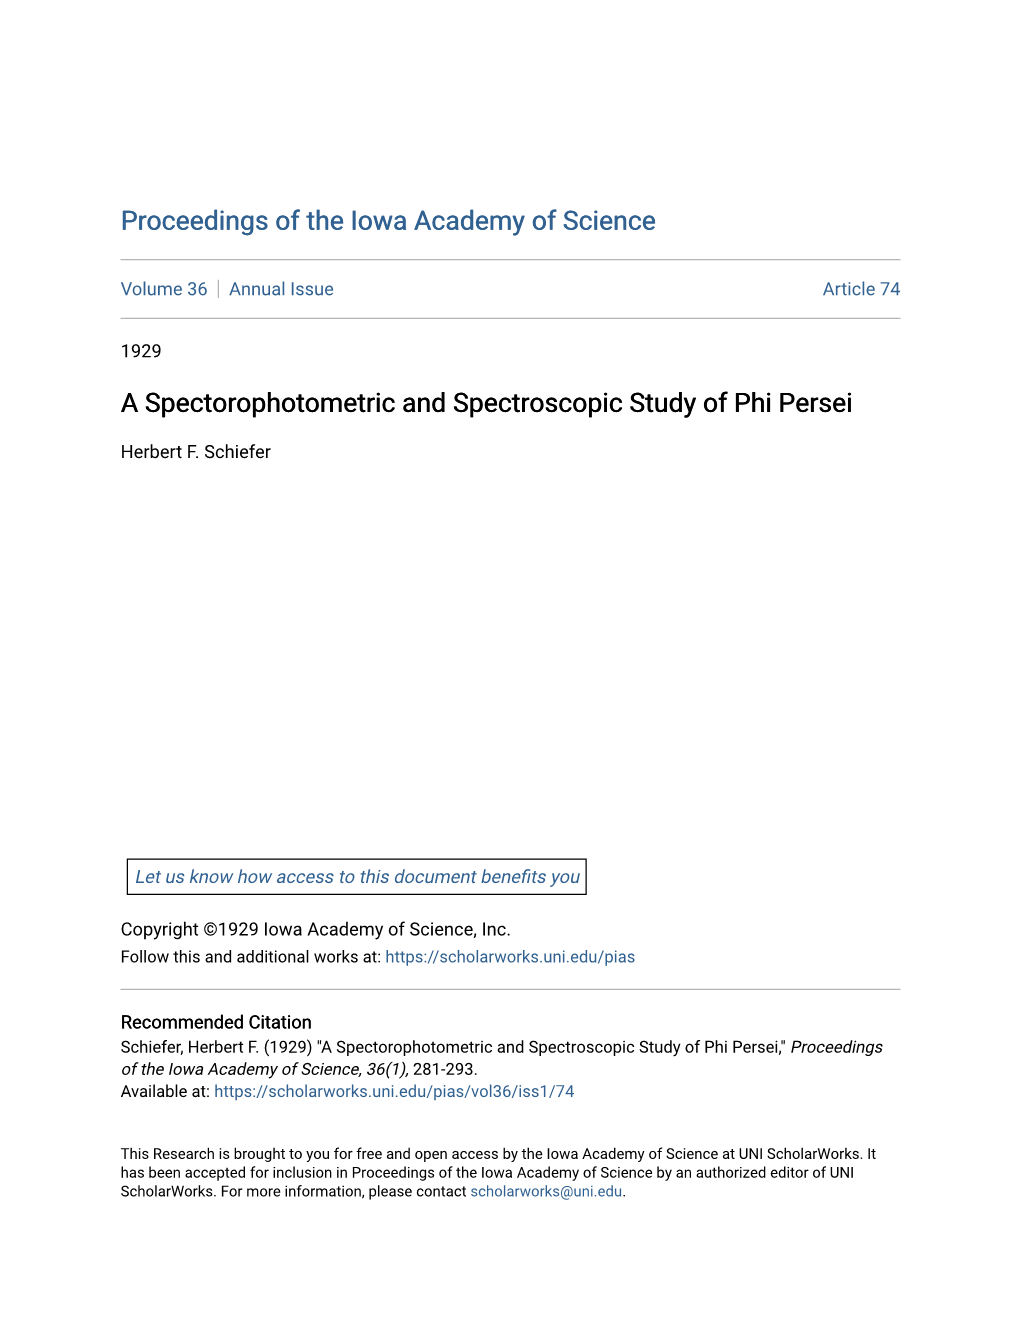 A Spectorophotometric and Spectroscopic Study of Phi Persei